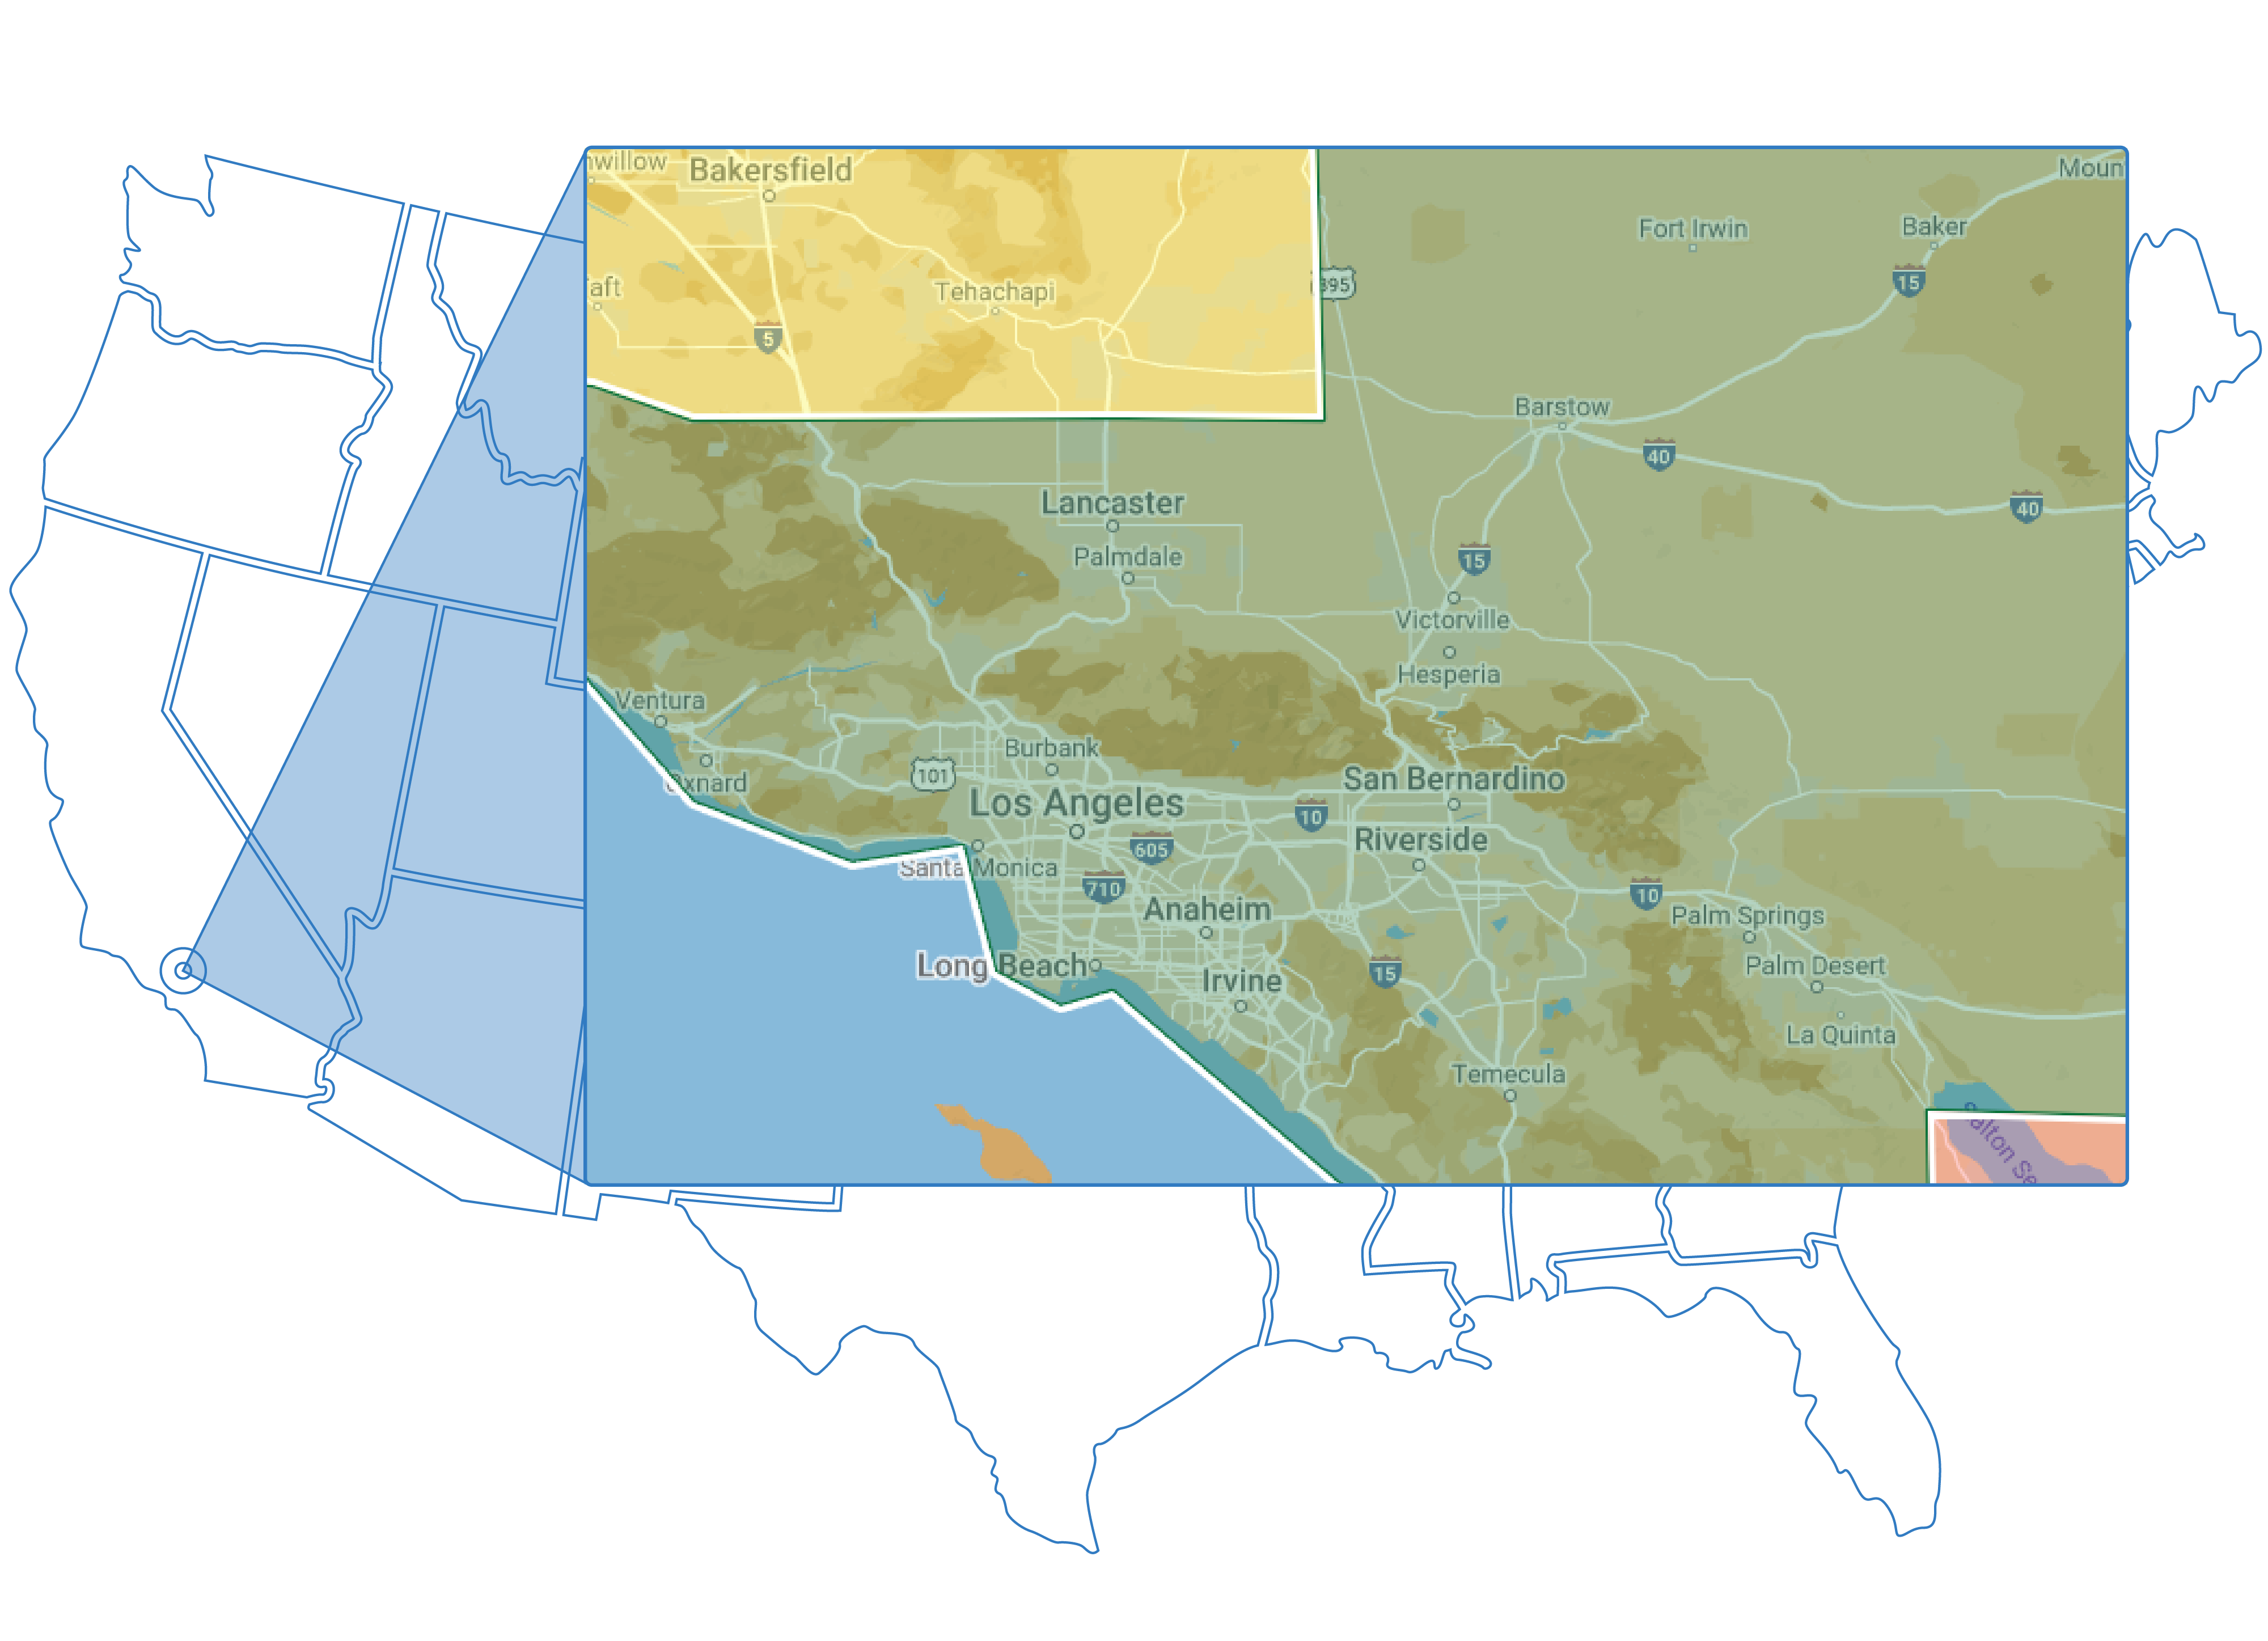 Los Angeles and greater Southern California is among the highest-income regions in the U.S. You would have to head northeast to Bakersfield or south all the way to the Mexican border at Calexico to find incomes and prices similar to averages in more affordable states.